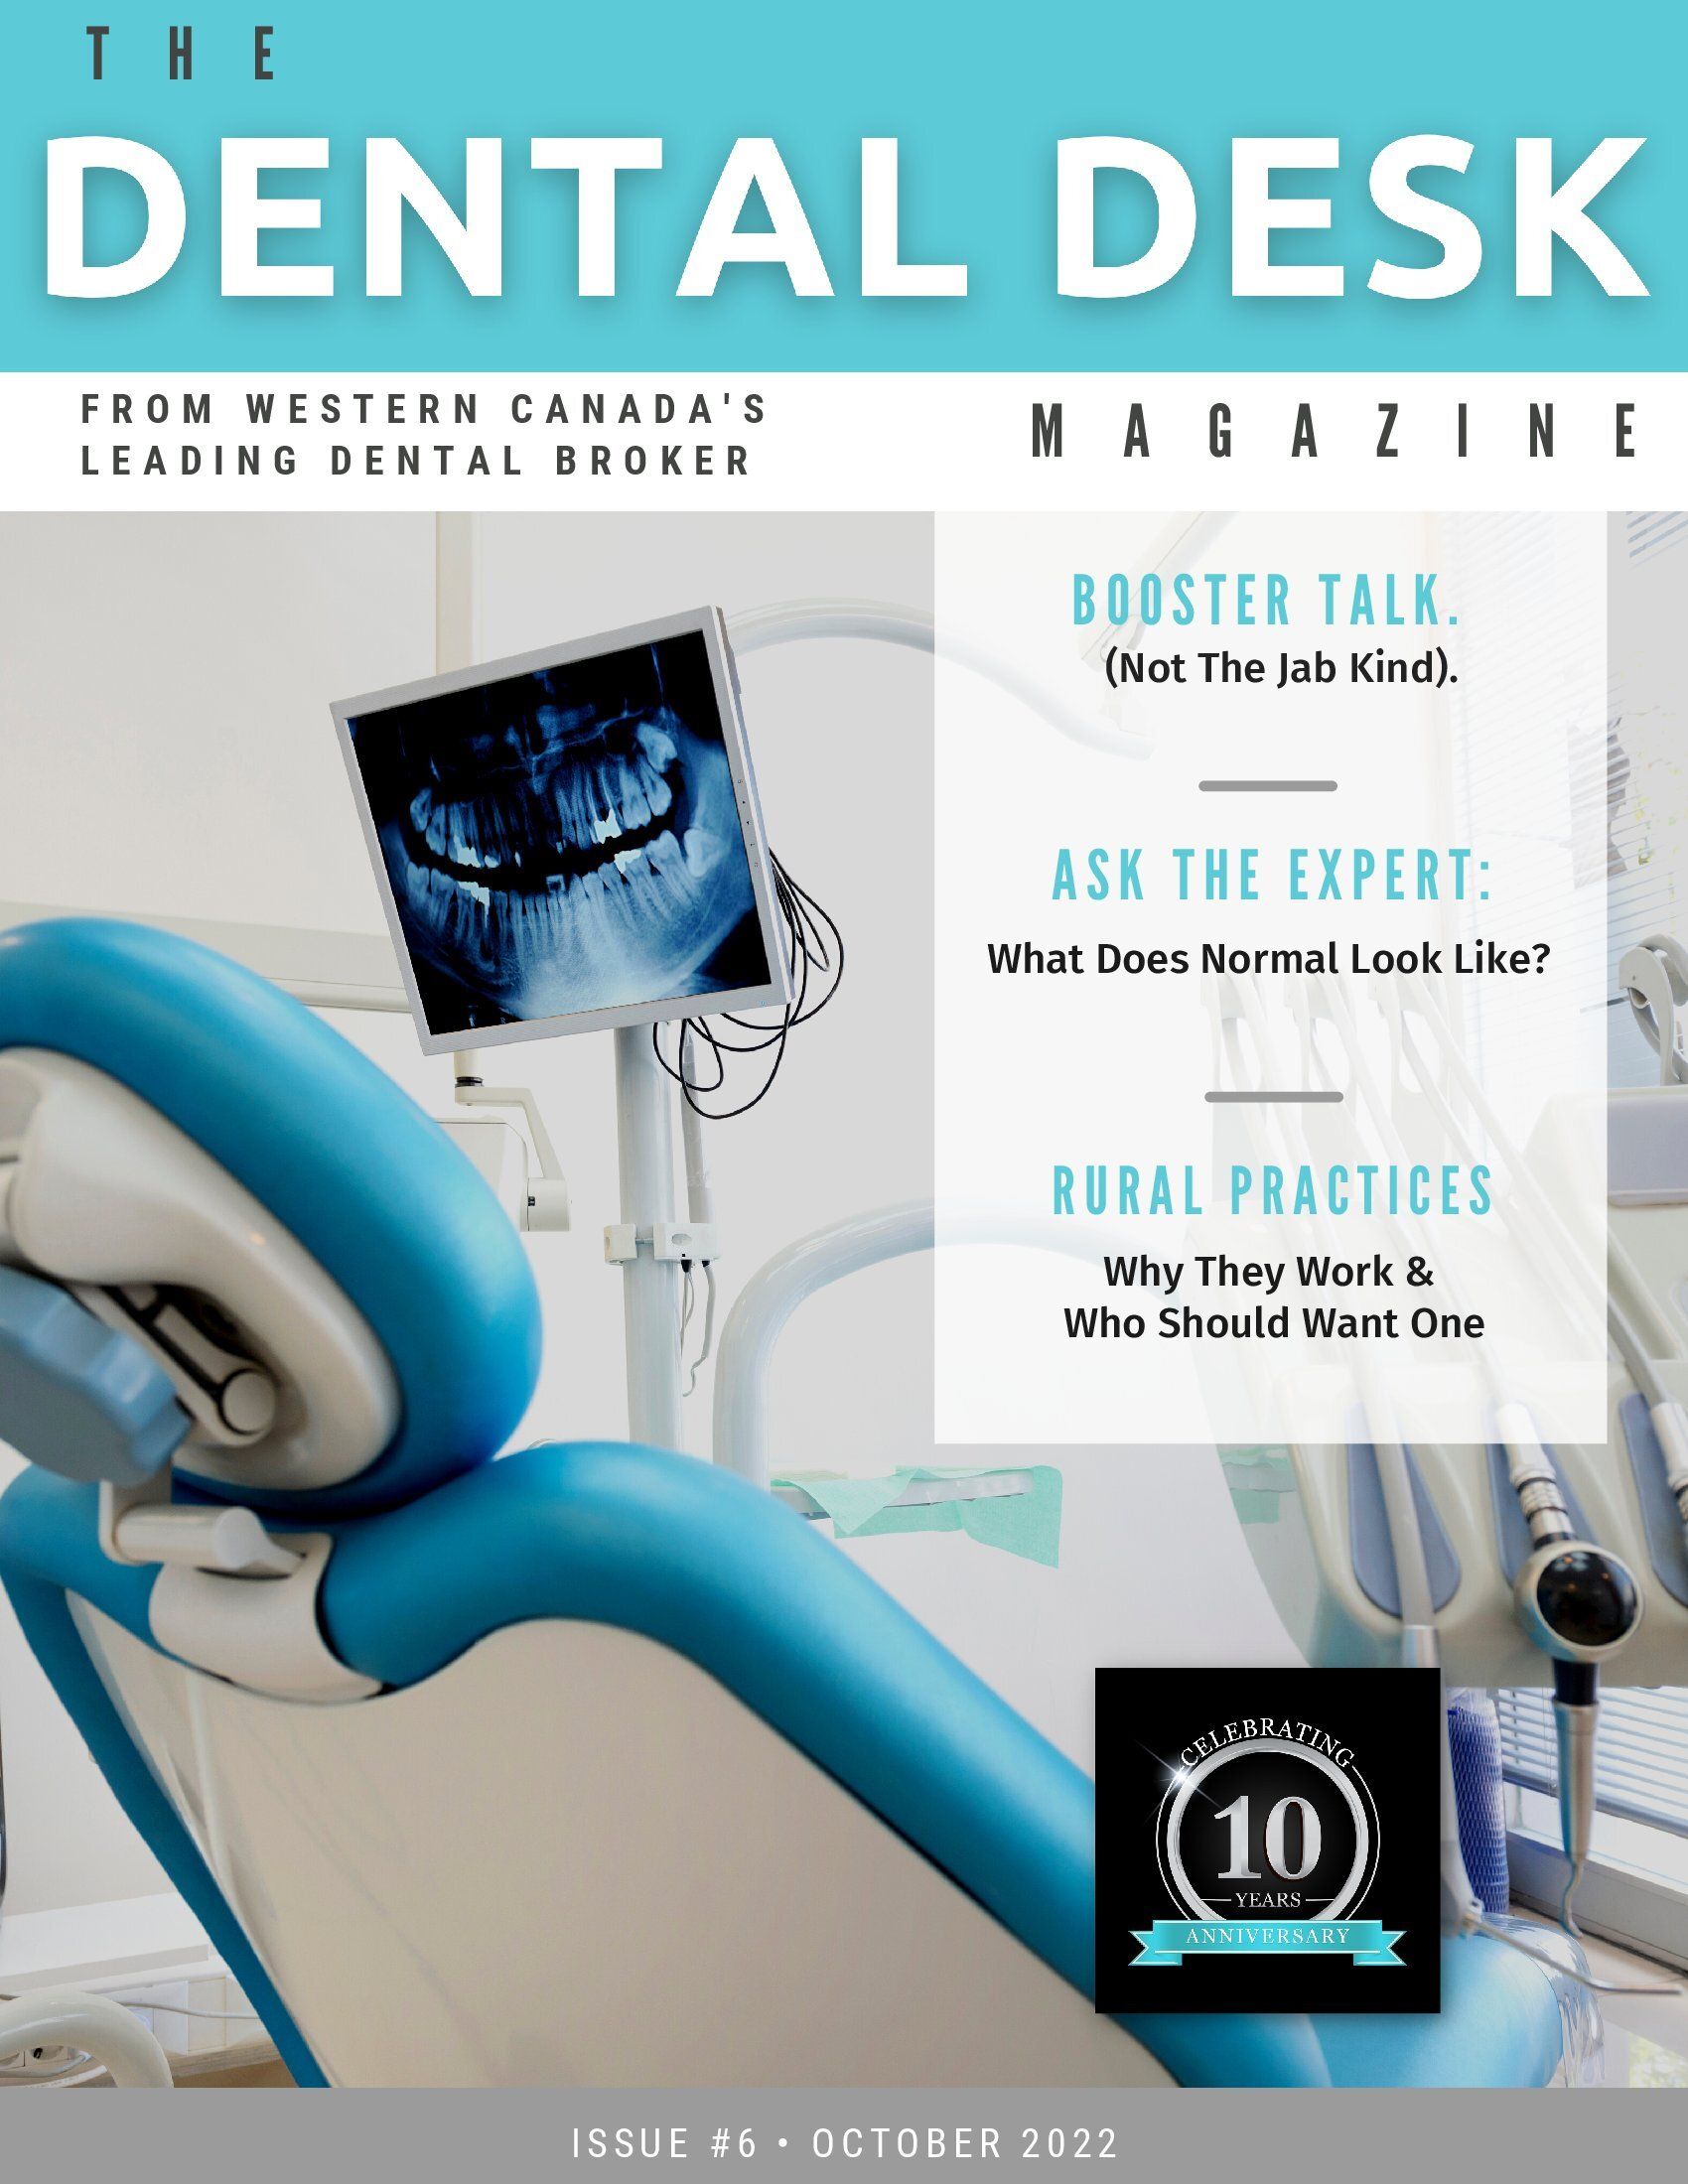 the dental desk magazine cover features a dentist's chair